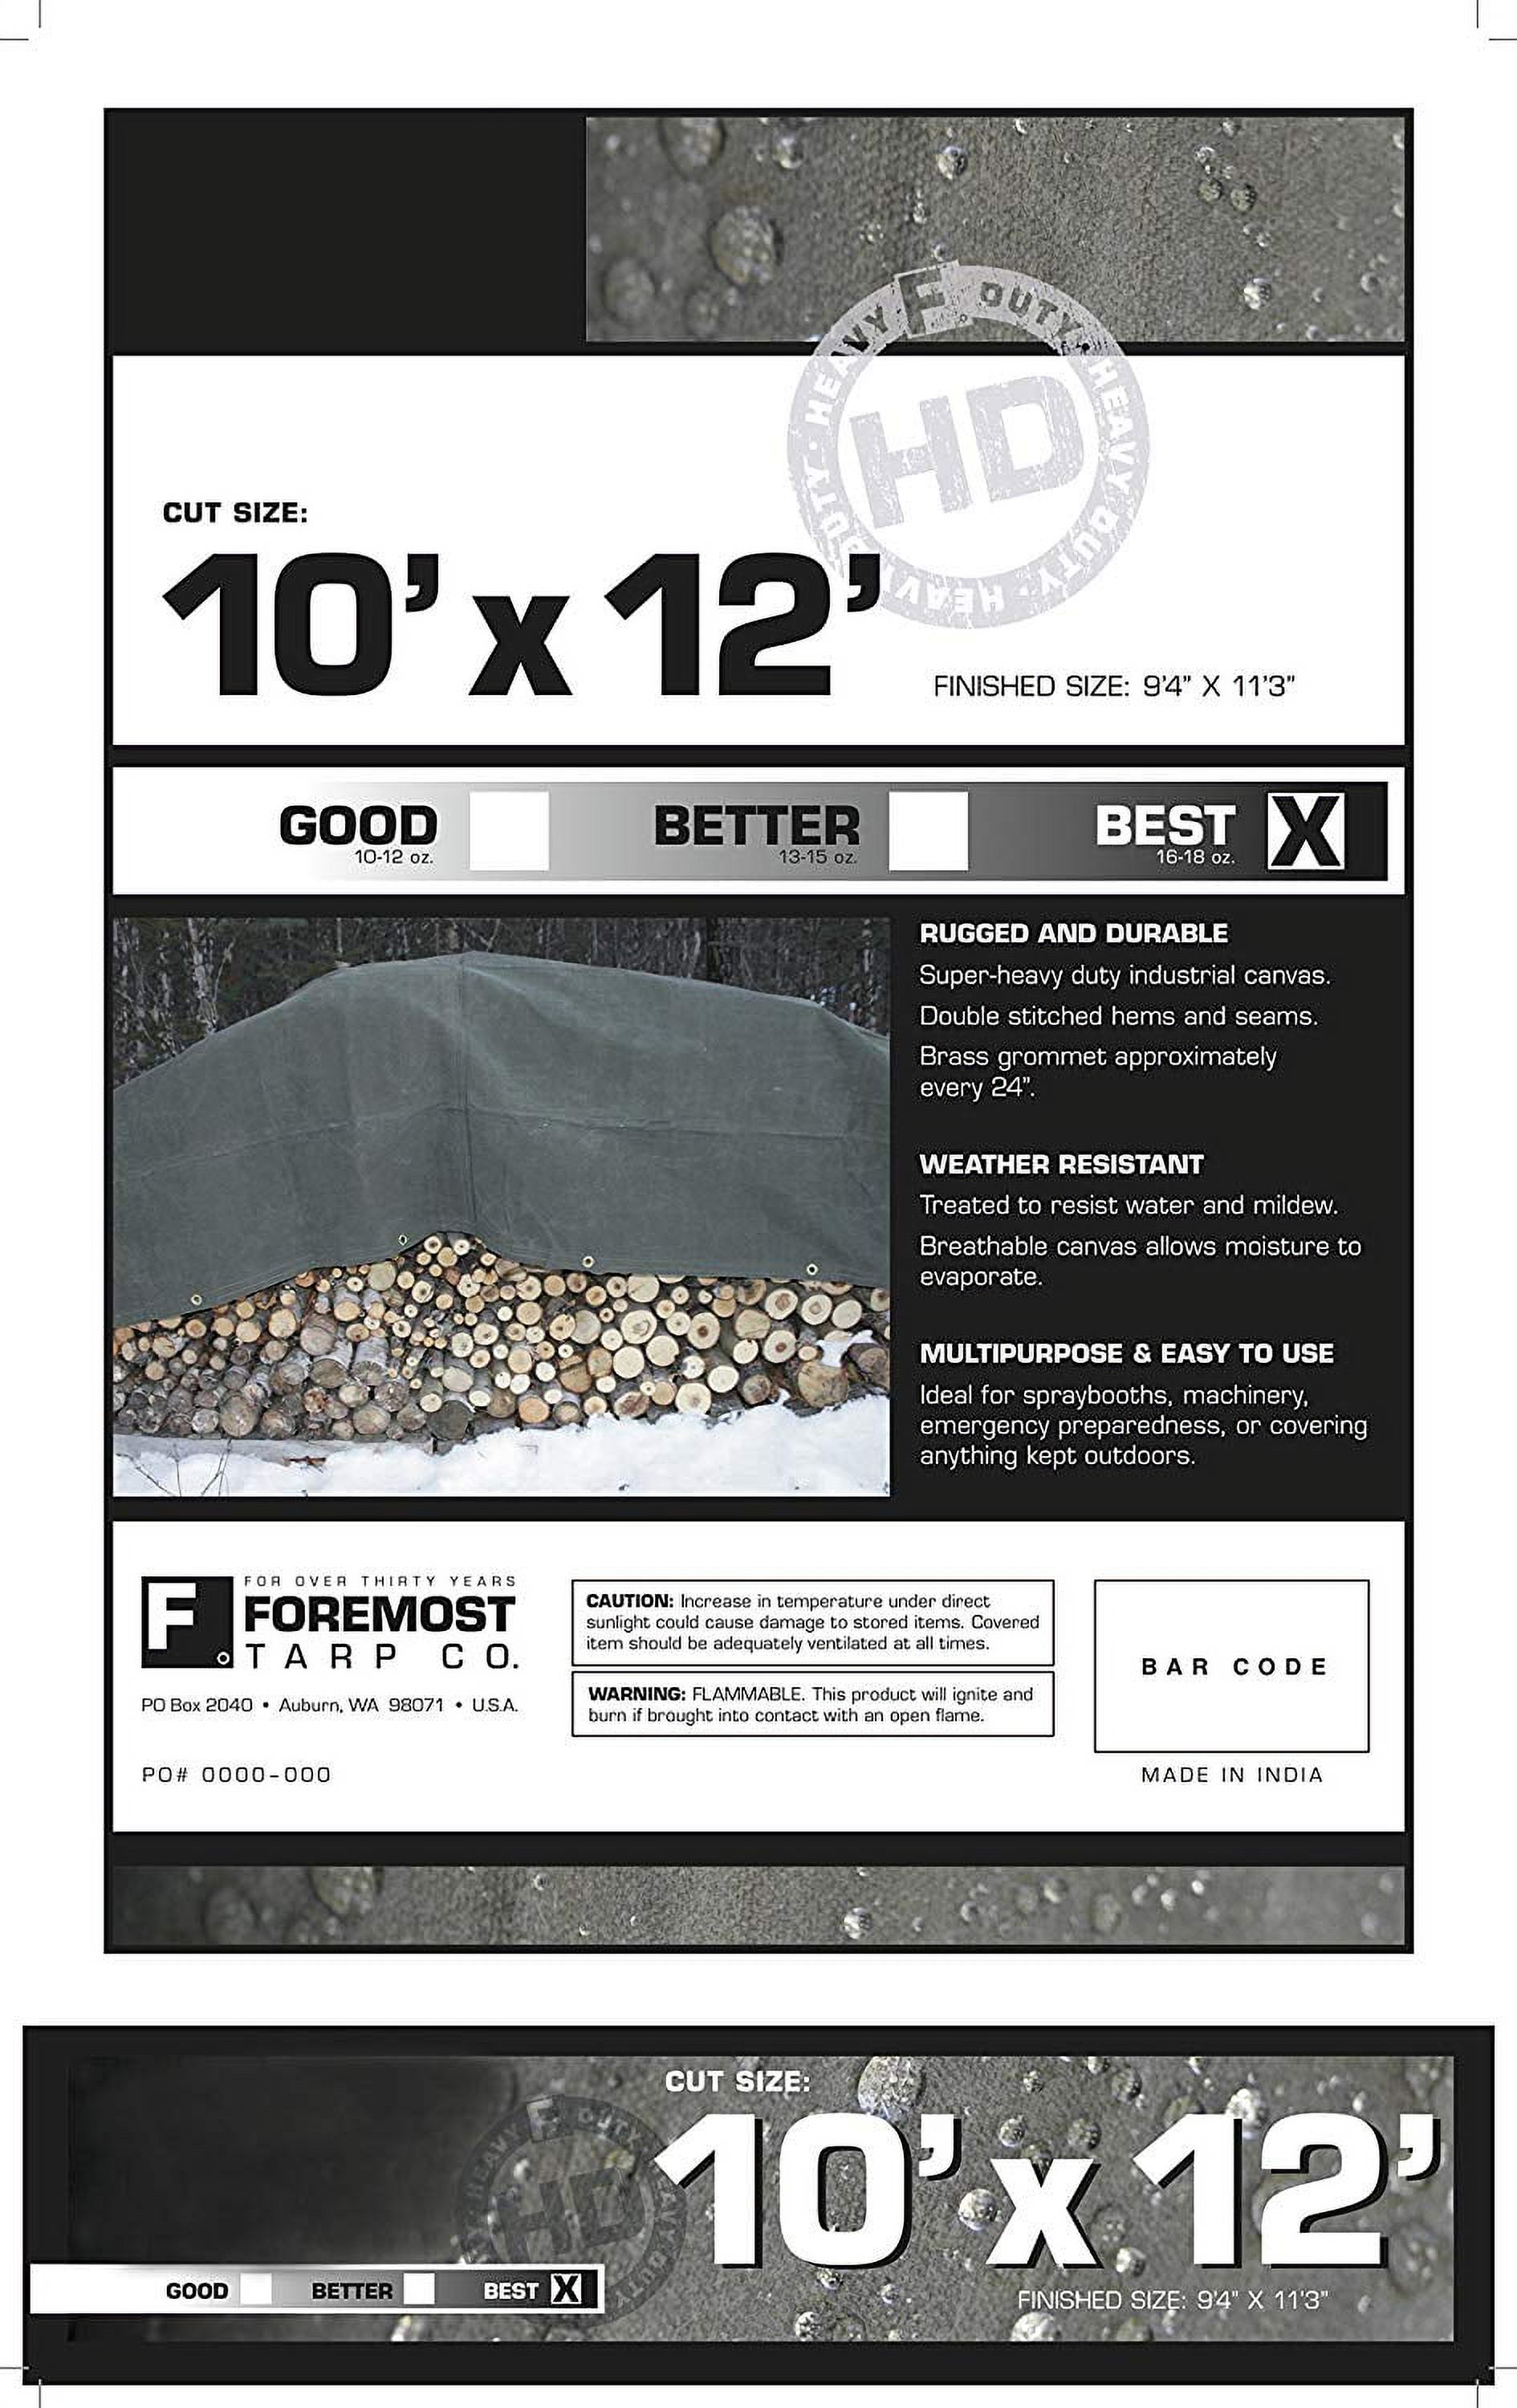 Foremost Dry Top 8 ft. x 10 ft. Heavy Duty Canvas Tarp Olive - image 3 of 4